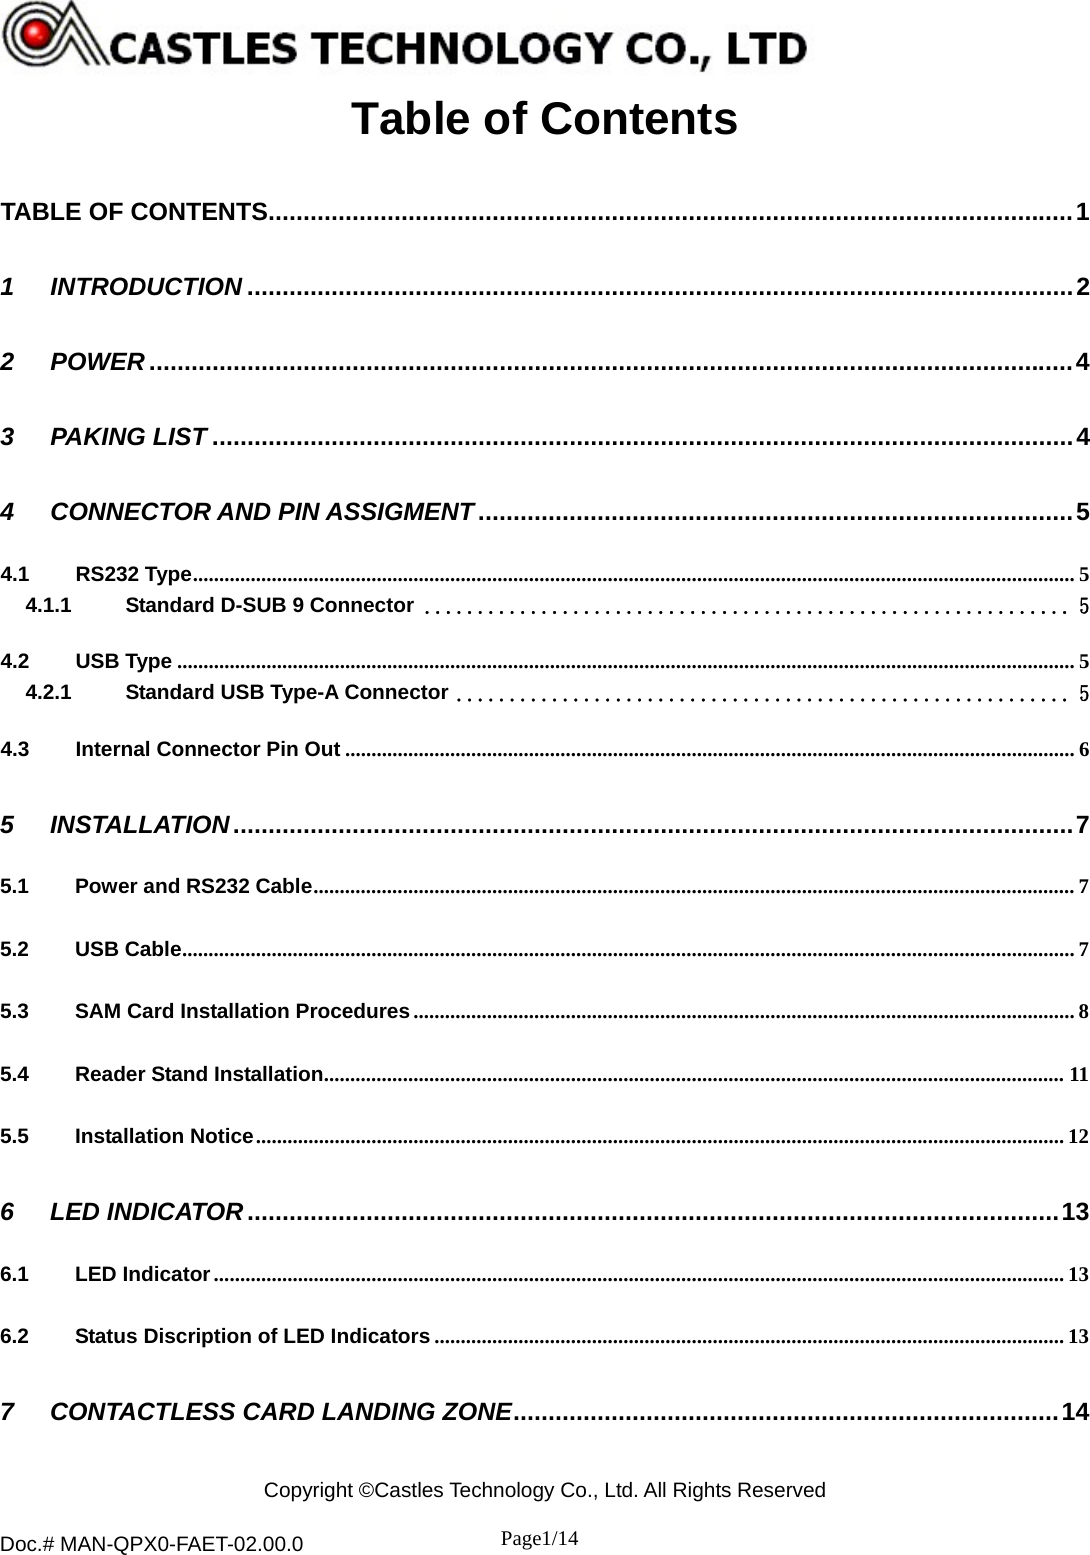  Copyright ©Castles Technology Co., Ltd. All Rights Reserved  Doc.# MAN-QPX0-FAET-02.00.0               Page1/14    Table of Contents TABLE OF CONTENTS...................................................................................................................1 1 INTRODUCTION ......................................................................................................................2 2 POWER ....................................................................................................................................4 3 PAKING LIST ...........................................................................................................................4 4 CONNECTOR AND PIN ASSIGMENT.....................................................................................5 4.1 RS232 Type........................................................................................................................................................................ 5 4.1.1 Standard D-SUB 9 Connector ............................................................. 5 4.2 USB Type ........................................................................................................................................................................... 5 4.2.1 Standard USB Type-A Connector .......................................................... 5 4.3 Internal Connector Pin Out ........................................................................................................................................... 6 5 INSTALLATION........................................................................................................................7 5.1 Power and RS232 Cable................................................................................................................................................. 7 5.2 USB Cable.......................................................................................................................................................................... 7 5.3 SAM Card Installation Procedures.............................................................................................................................. 8 5.4 Reader Stand Installation............................................................................................................................................. 11 5.5 Installation Notice.......................................................................................................................................................... 12 6 LED INDICATOR....................................................................................................................13 6.1 LED Indicator.................................................................................................................................................................. 13 6.2 Status Discription of LED Indicators ........................................................................................................................ 13 7 CONTACTLESS CARD LANDING ZONE..............................................................................14  